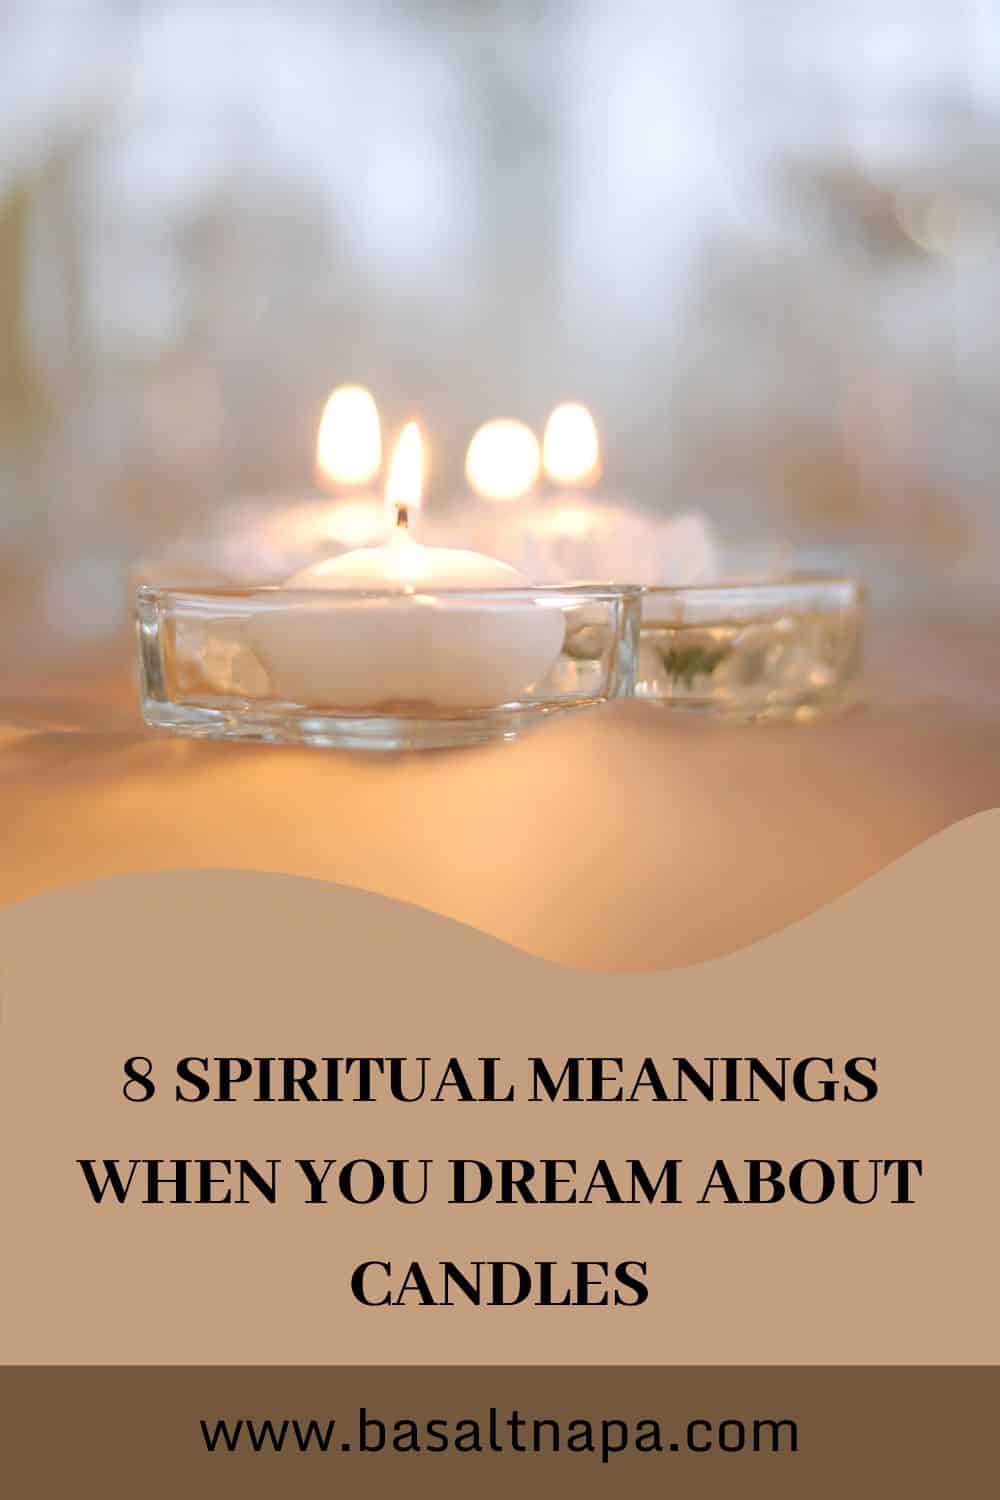 8 Meanings of dreaming about candles